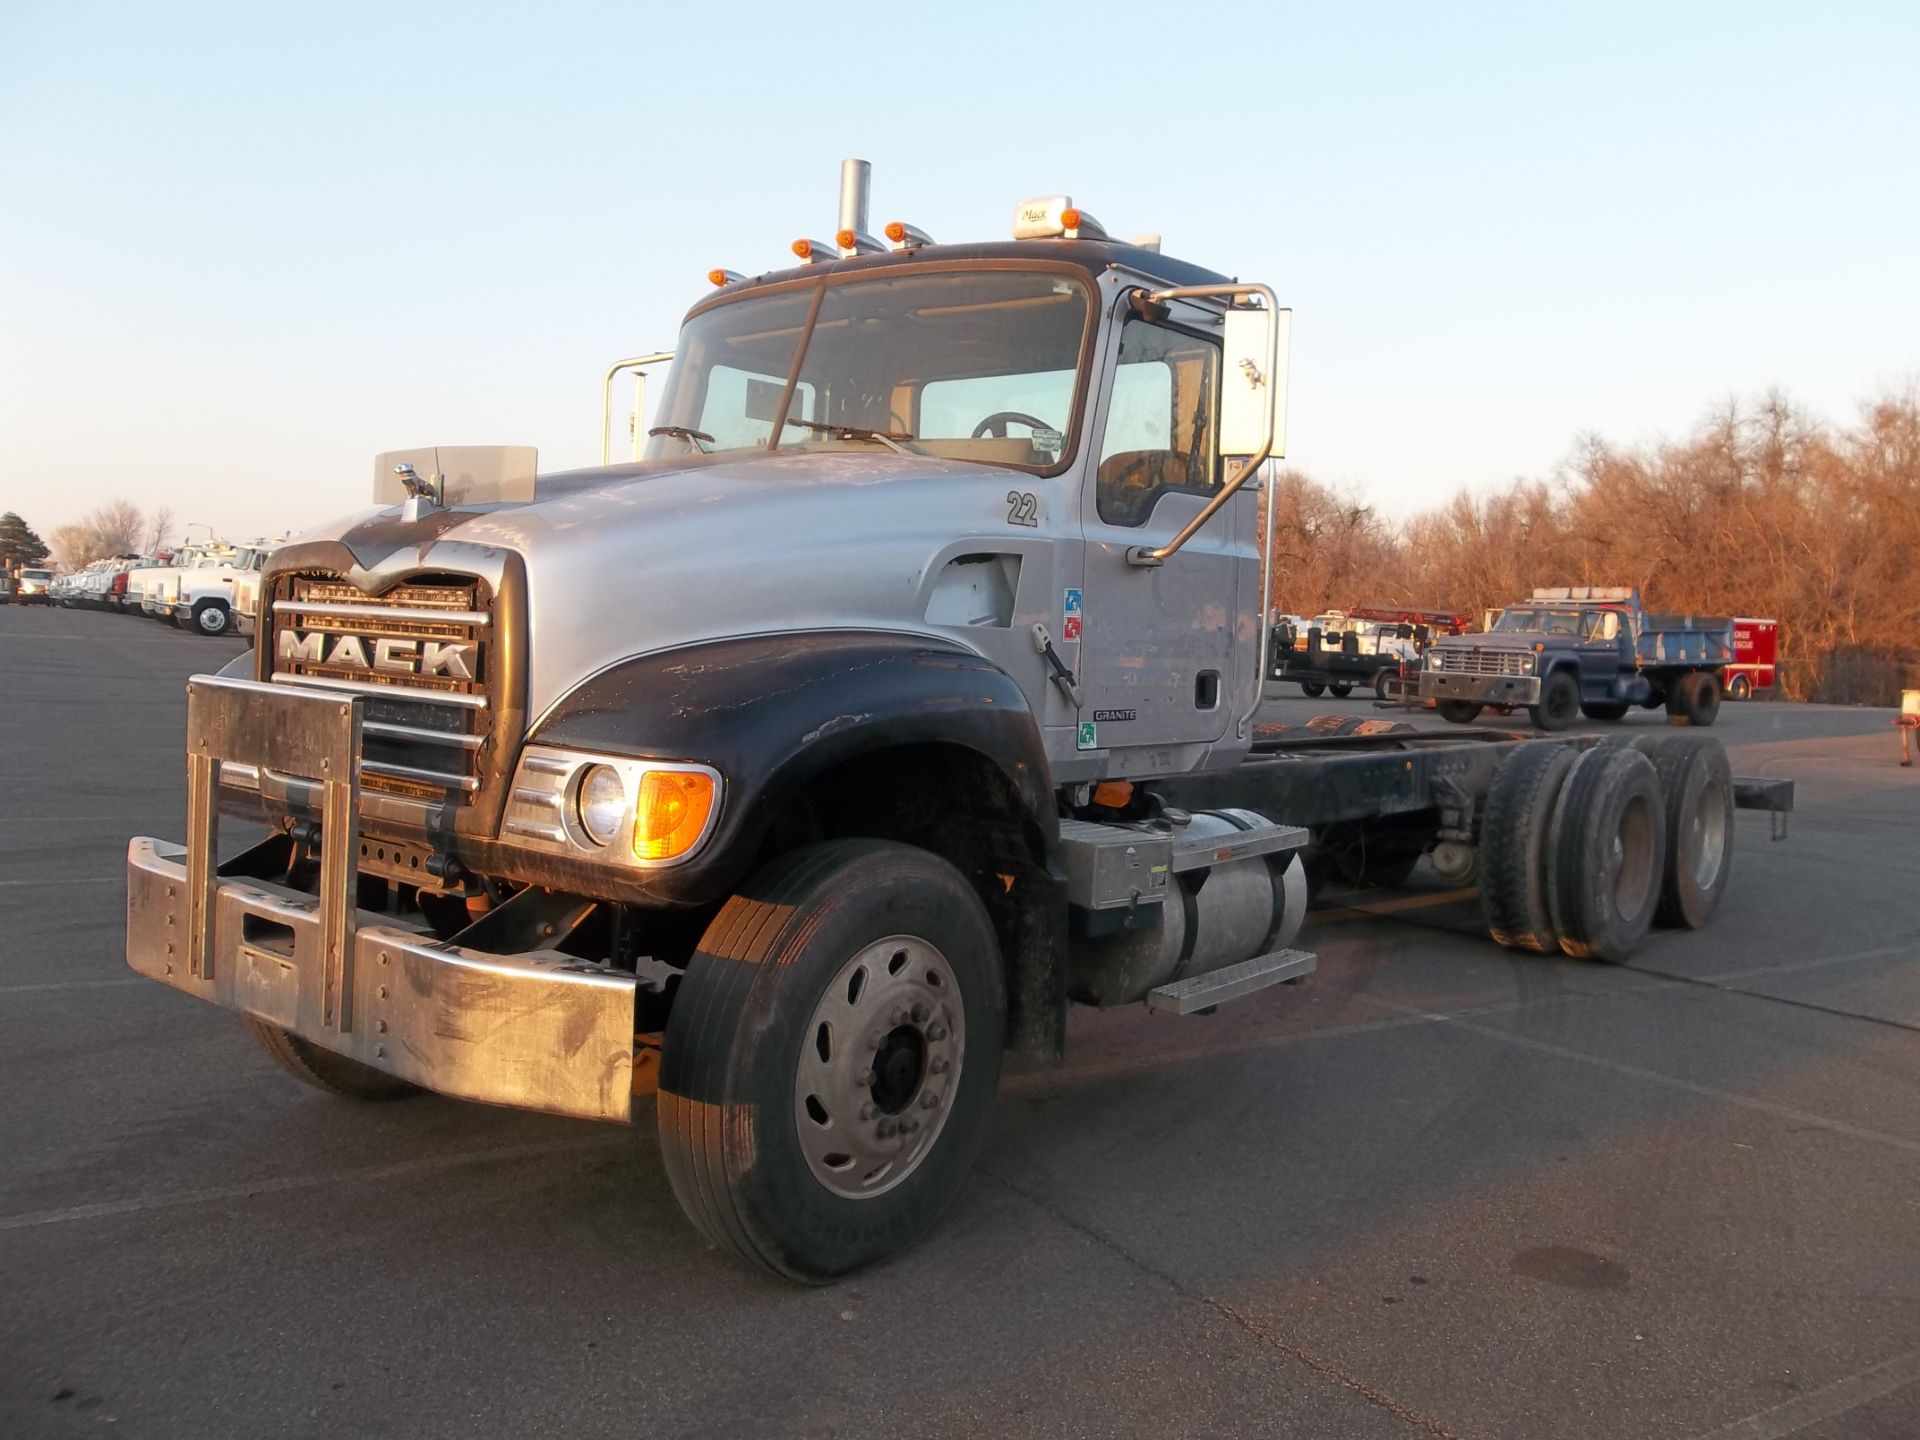 2008 Mack CV713 Cab & Chassis Truck, s/n 1m2ag11c08m070709,Mack E7 eng, 8 spd trans, od reads 170544 - Image 2 of 6